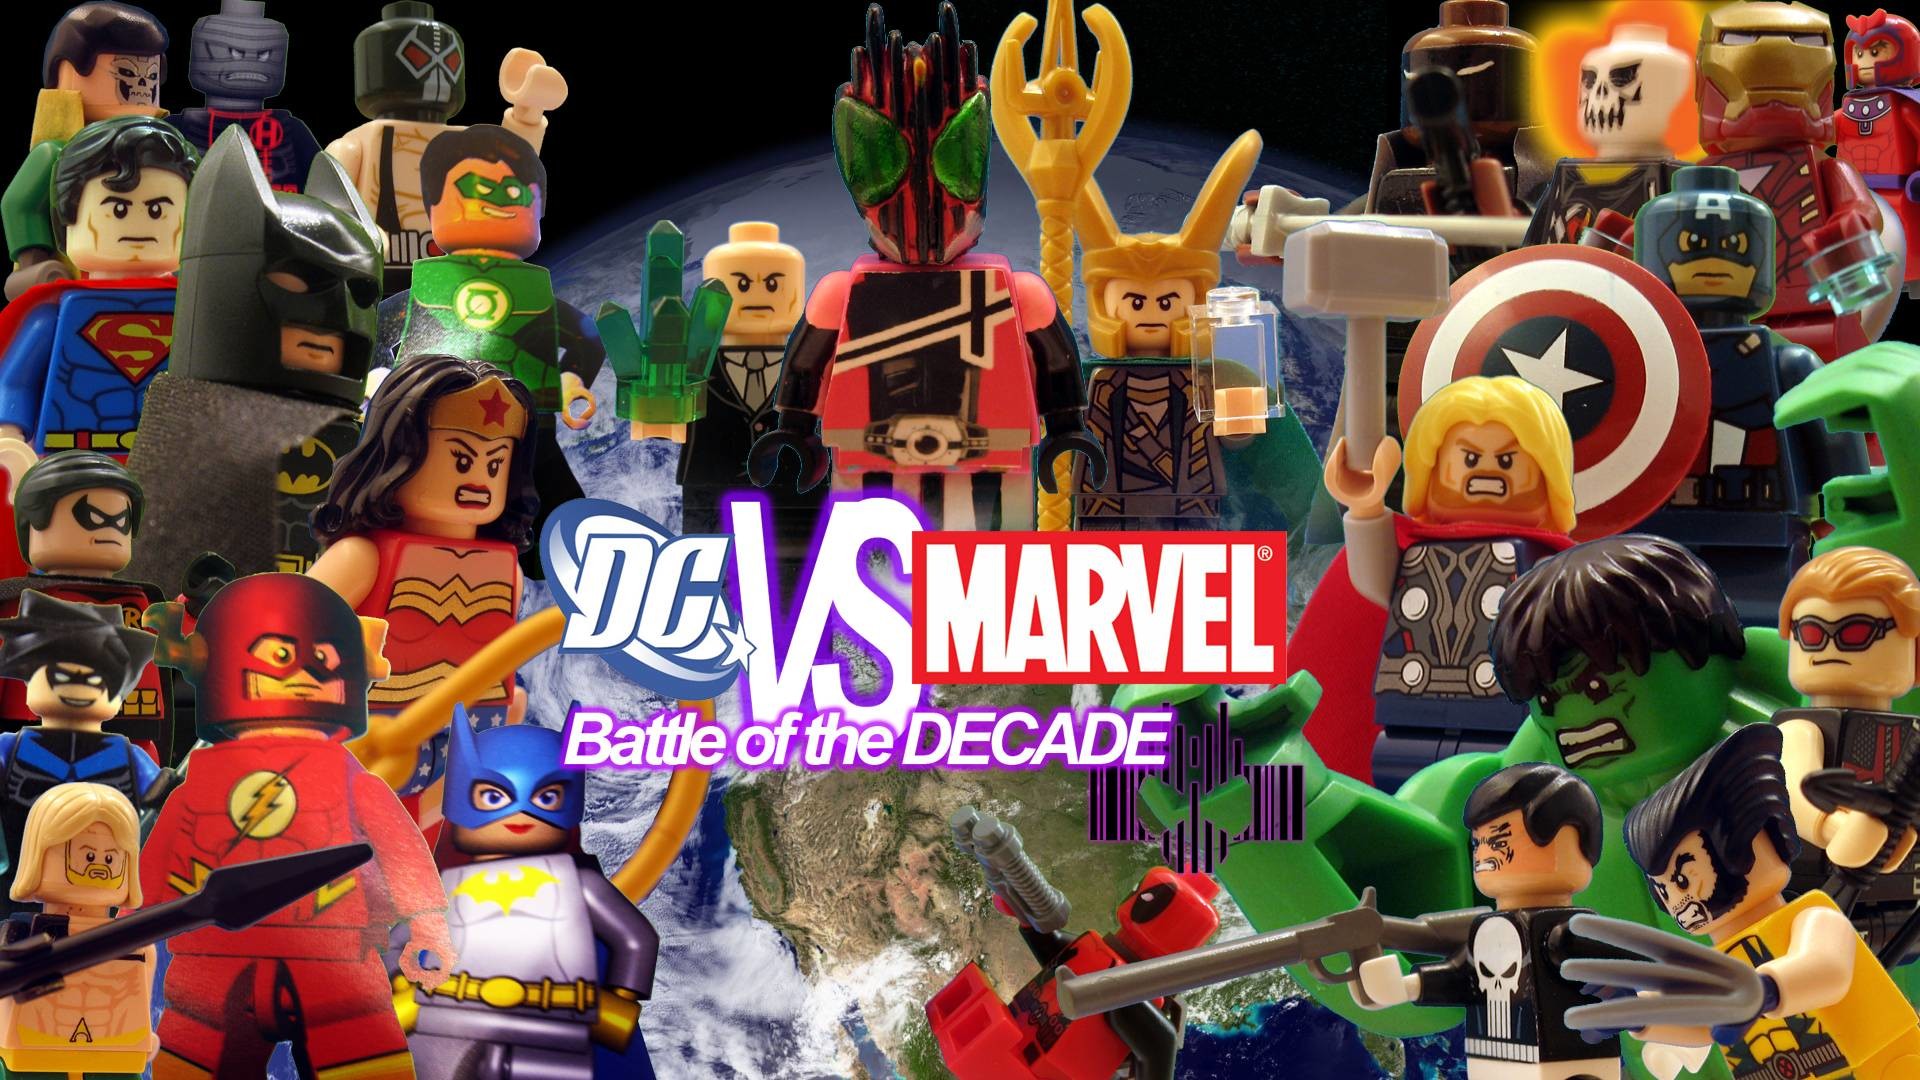 1920x1080 LEGO DC VS MARVEL: Battle of the Decade Wallpaper by Digger318 .